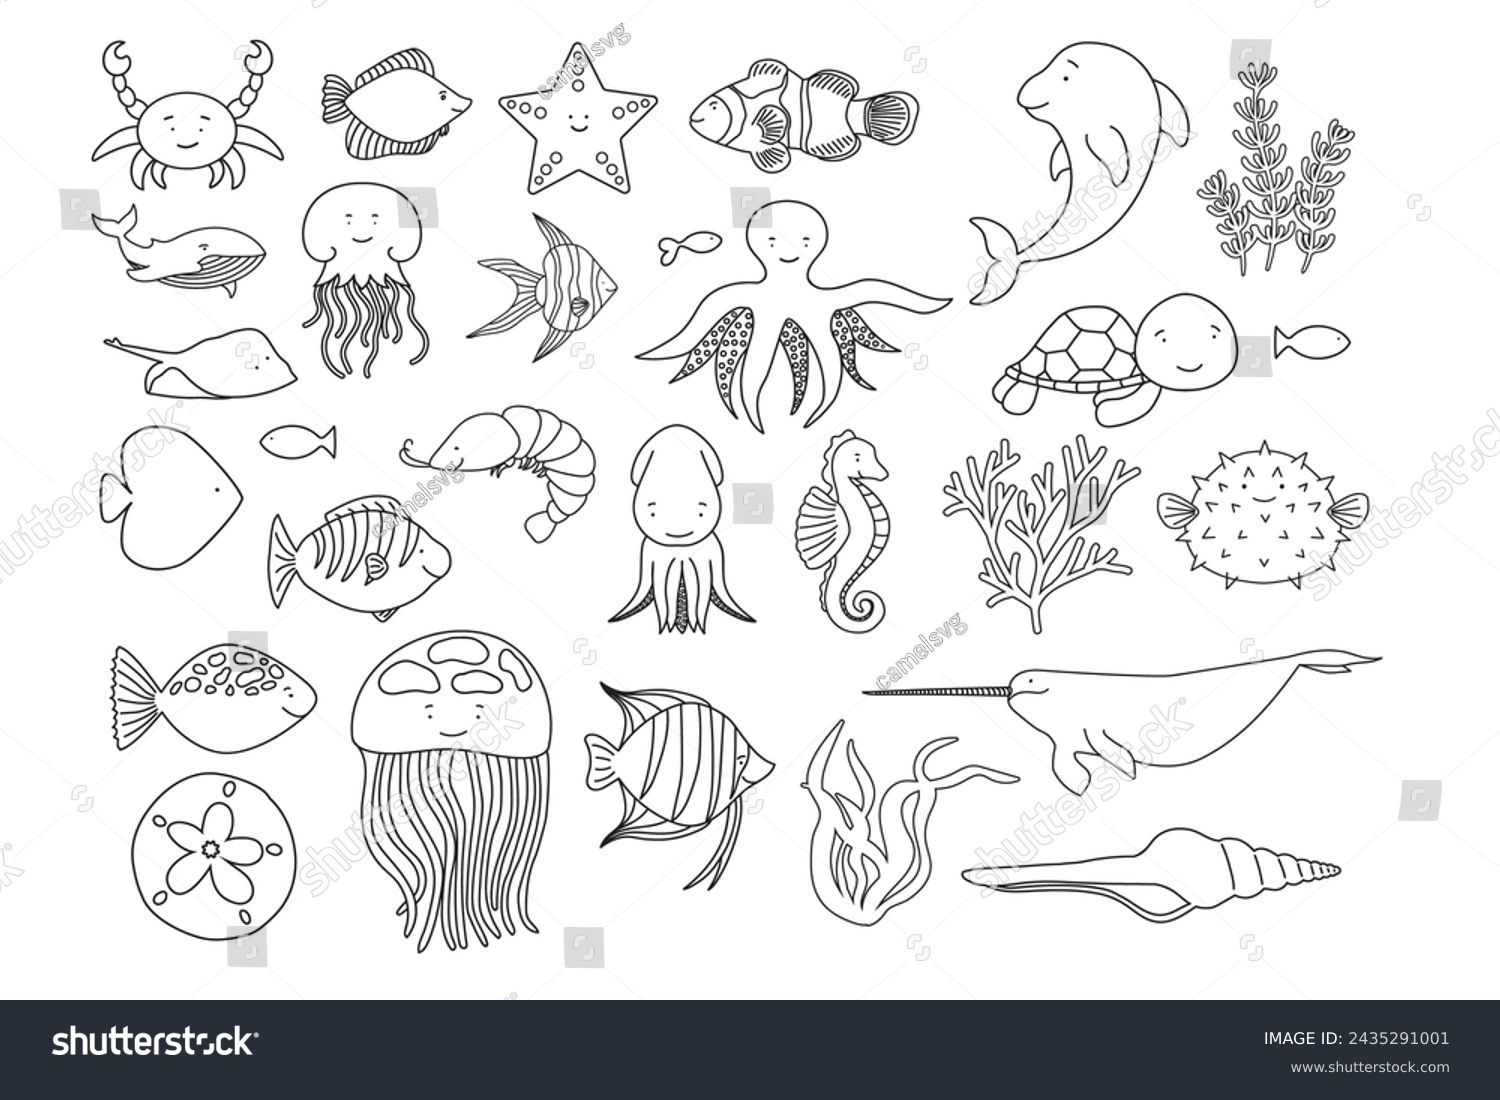 SVG of Sea Animal, Sea Animals, Silhouette, Sea Animals Bundle, line-work, Baby Turtle, Ocean Fish, Seahorse, Crab, Dolphin Wale, Doodle, Narwhale, sea-star, octopus, clown fish, jellyfish, ray fish,  svg